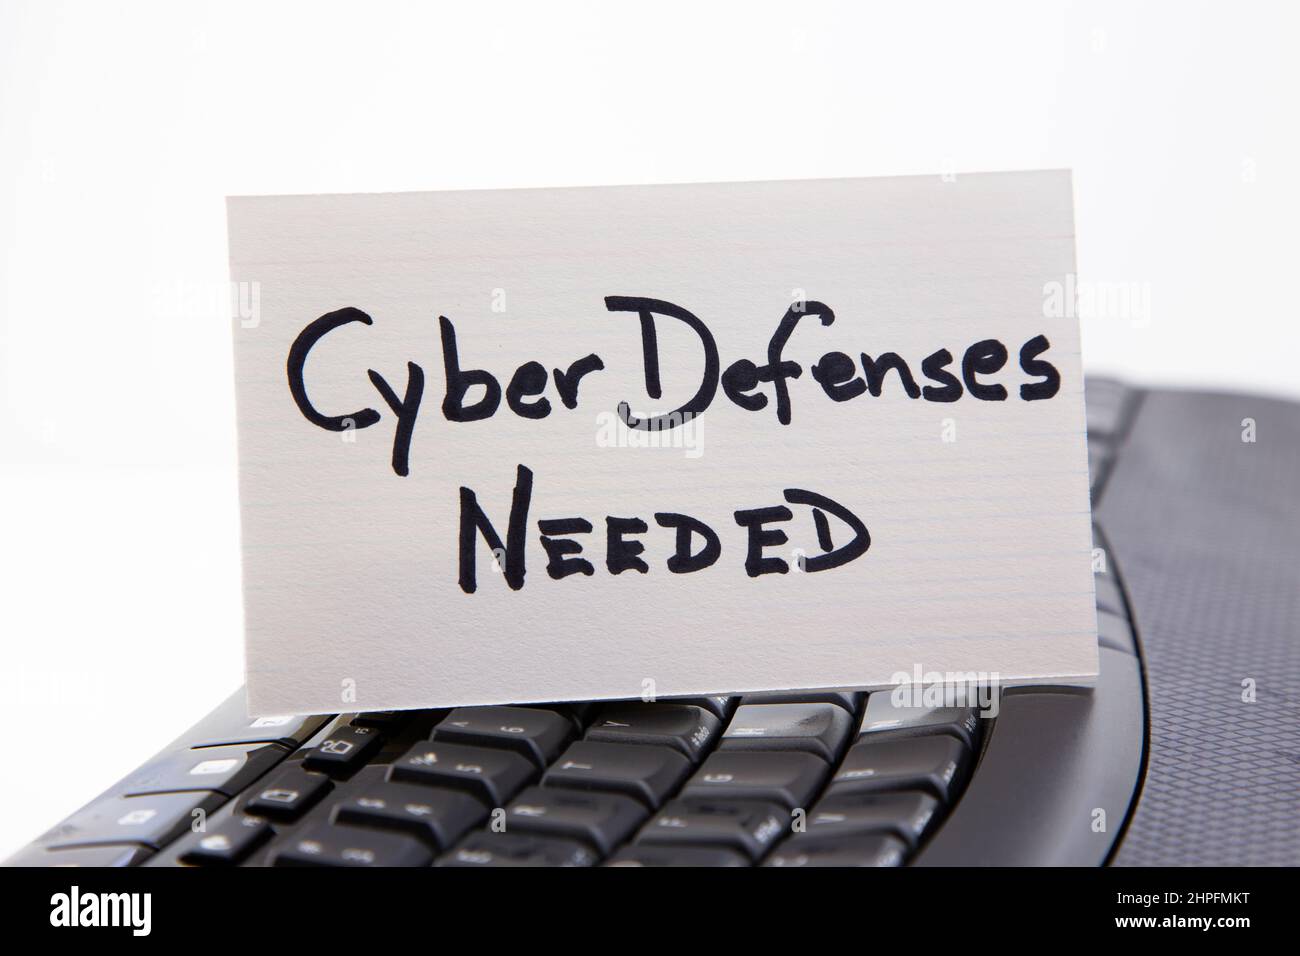 Card lettered Cyber Defenses NEEDED placed on black keyboard reflects protection needs against digital threats Stock Photo